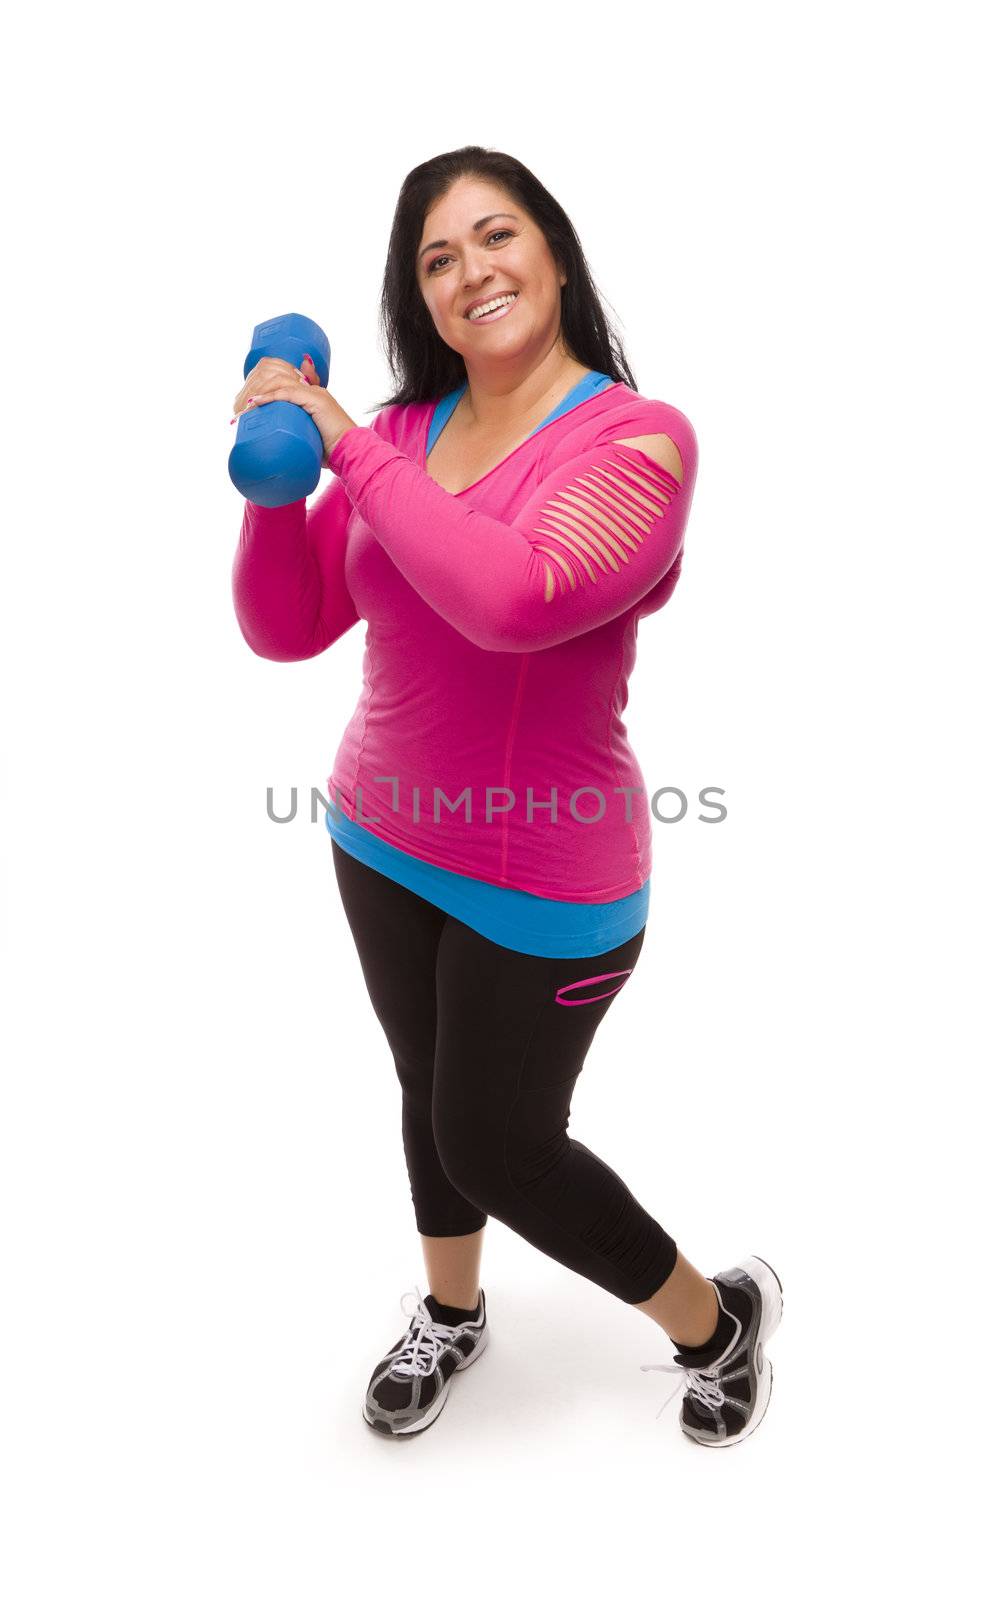 Attractive Middle Aged Hispanic Woman In Workout Clothes Lifting Dumbbell Against a White Background.